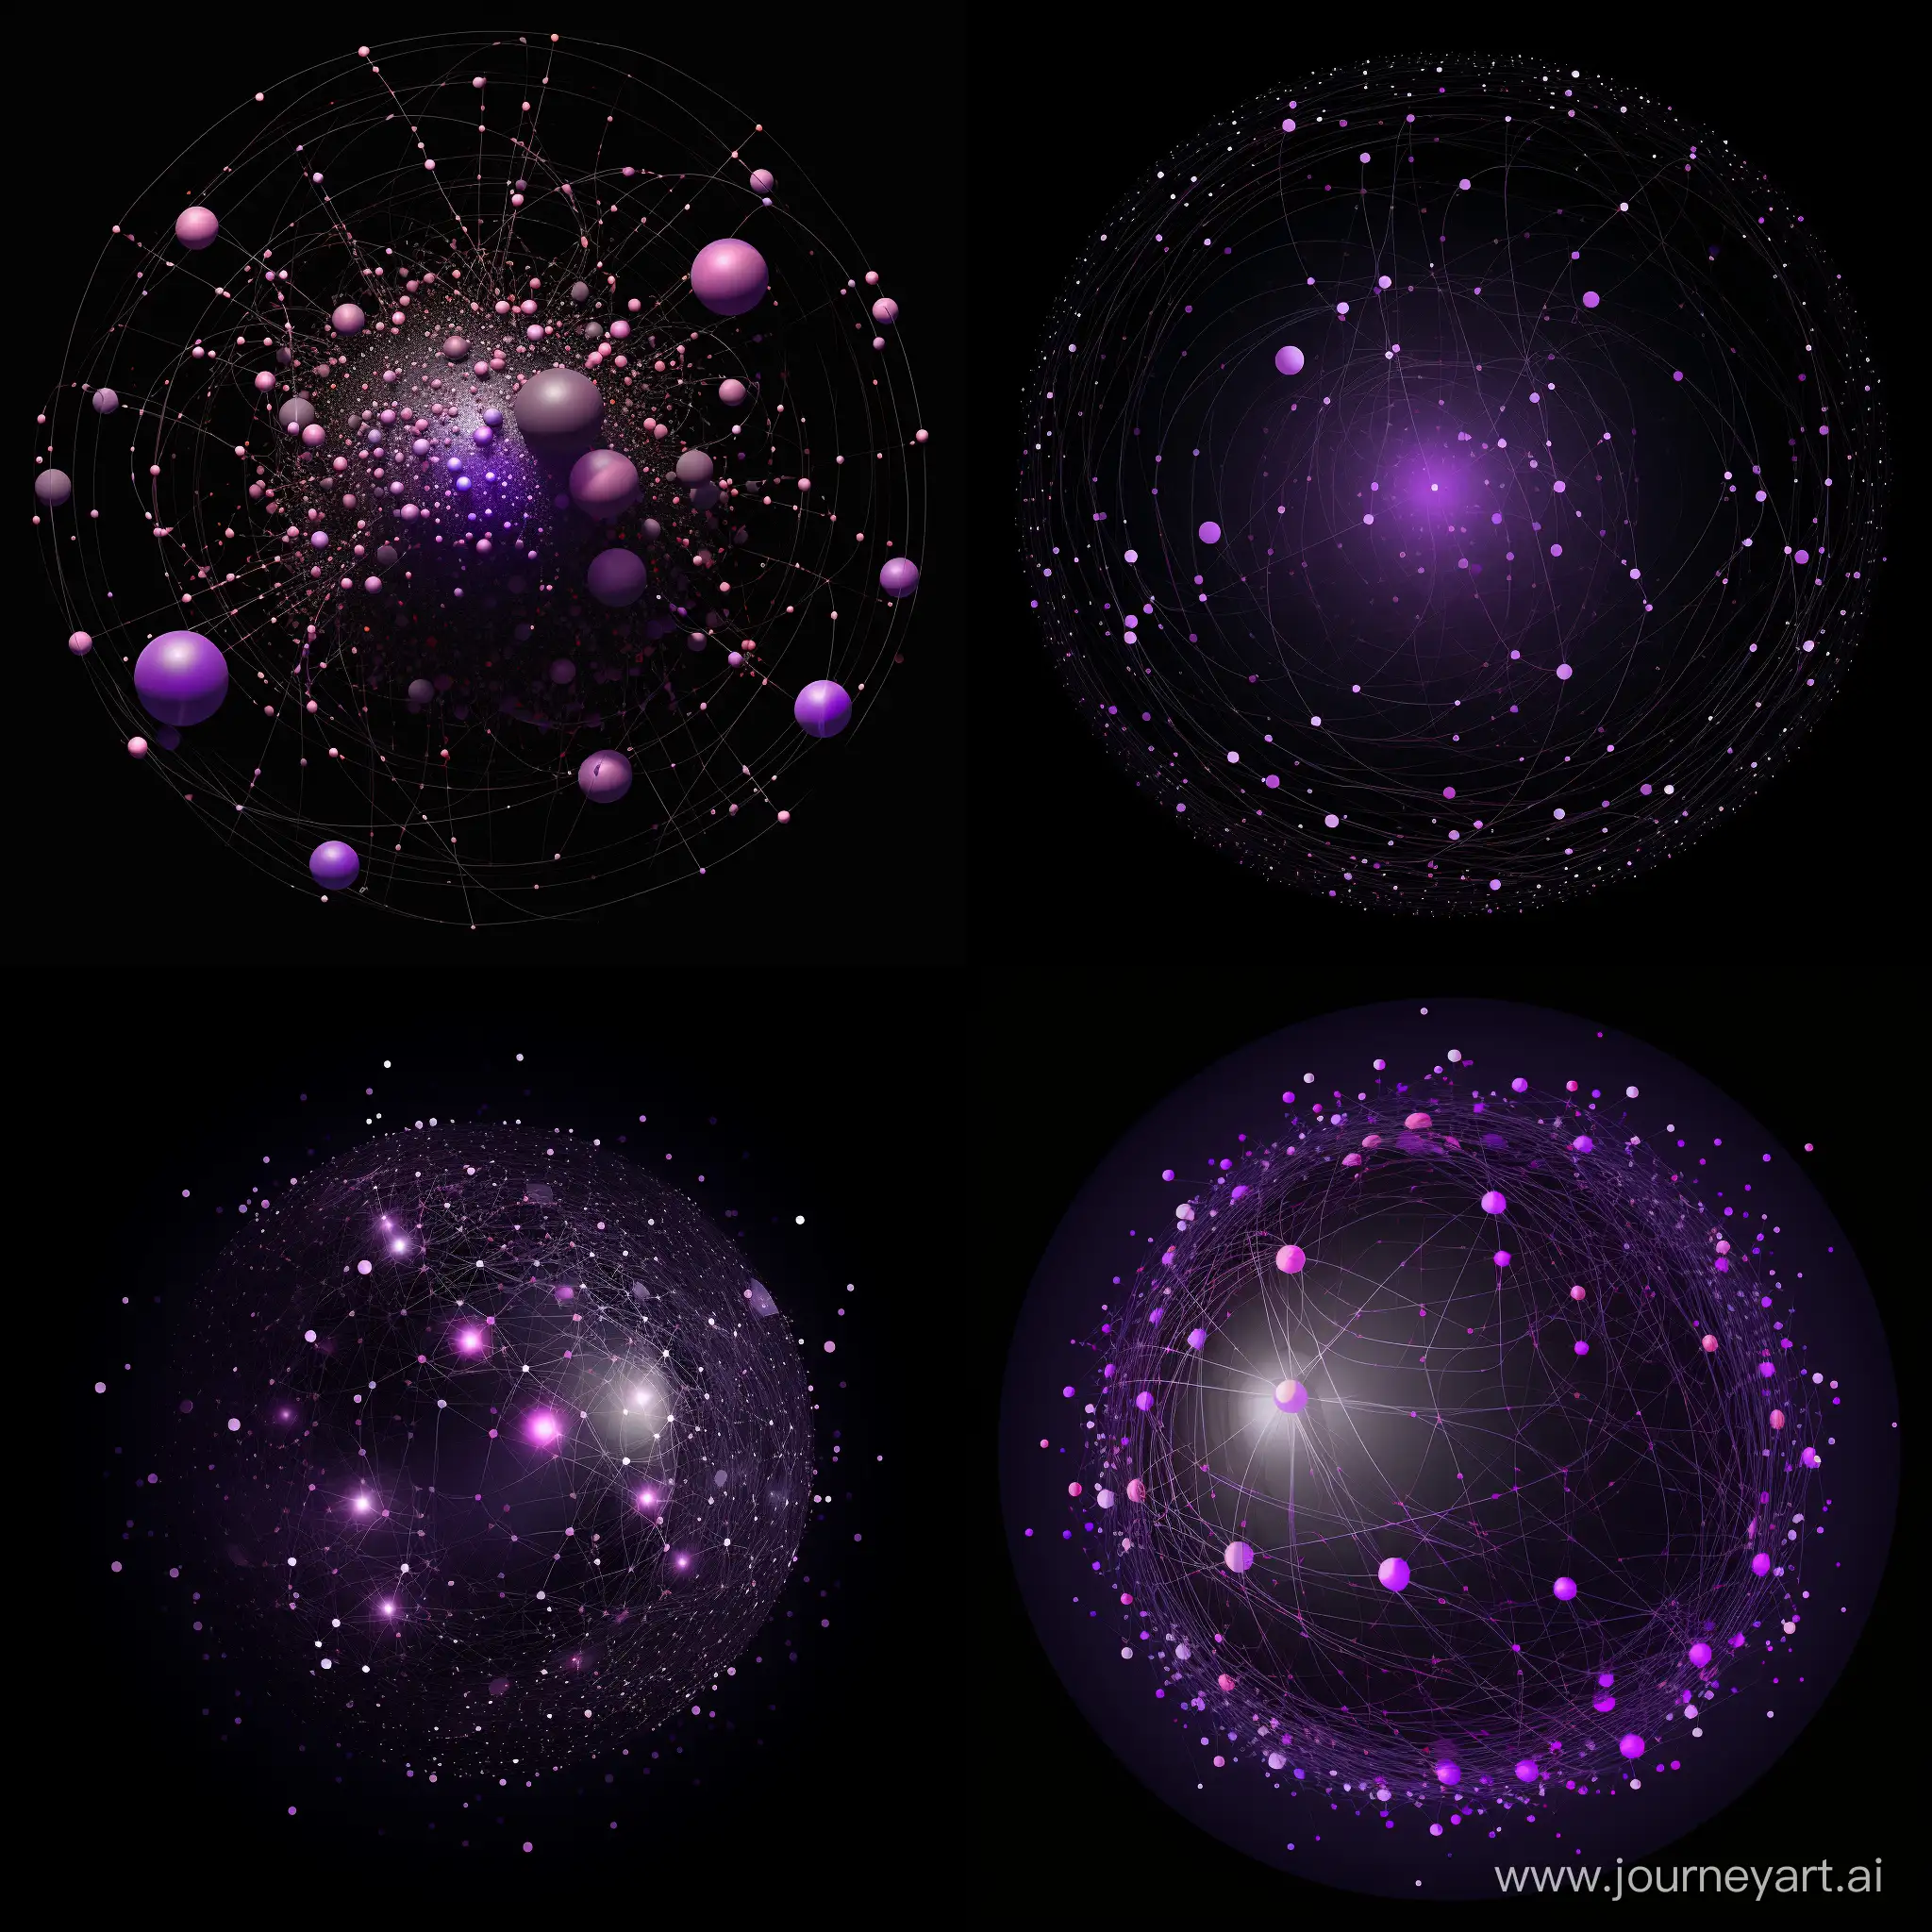 Vibrant-Cosmic-Burst-Intricate-Network-of-Purple-Connections